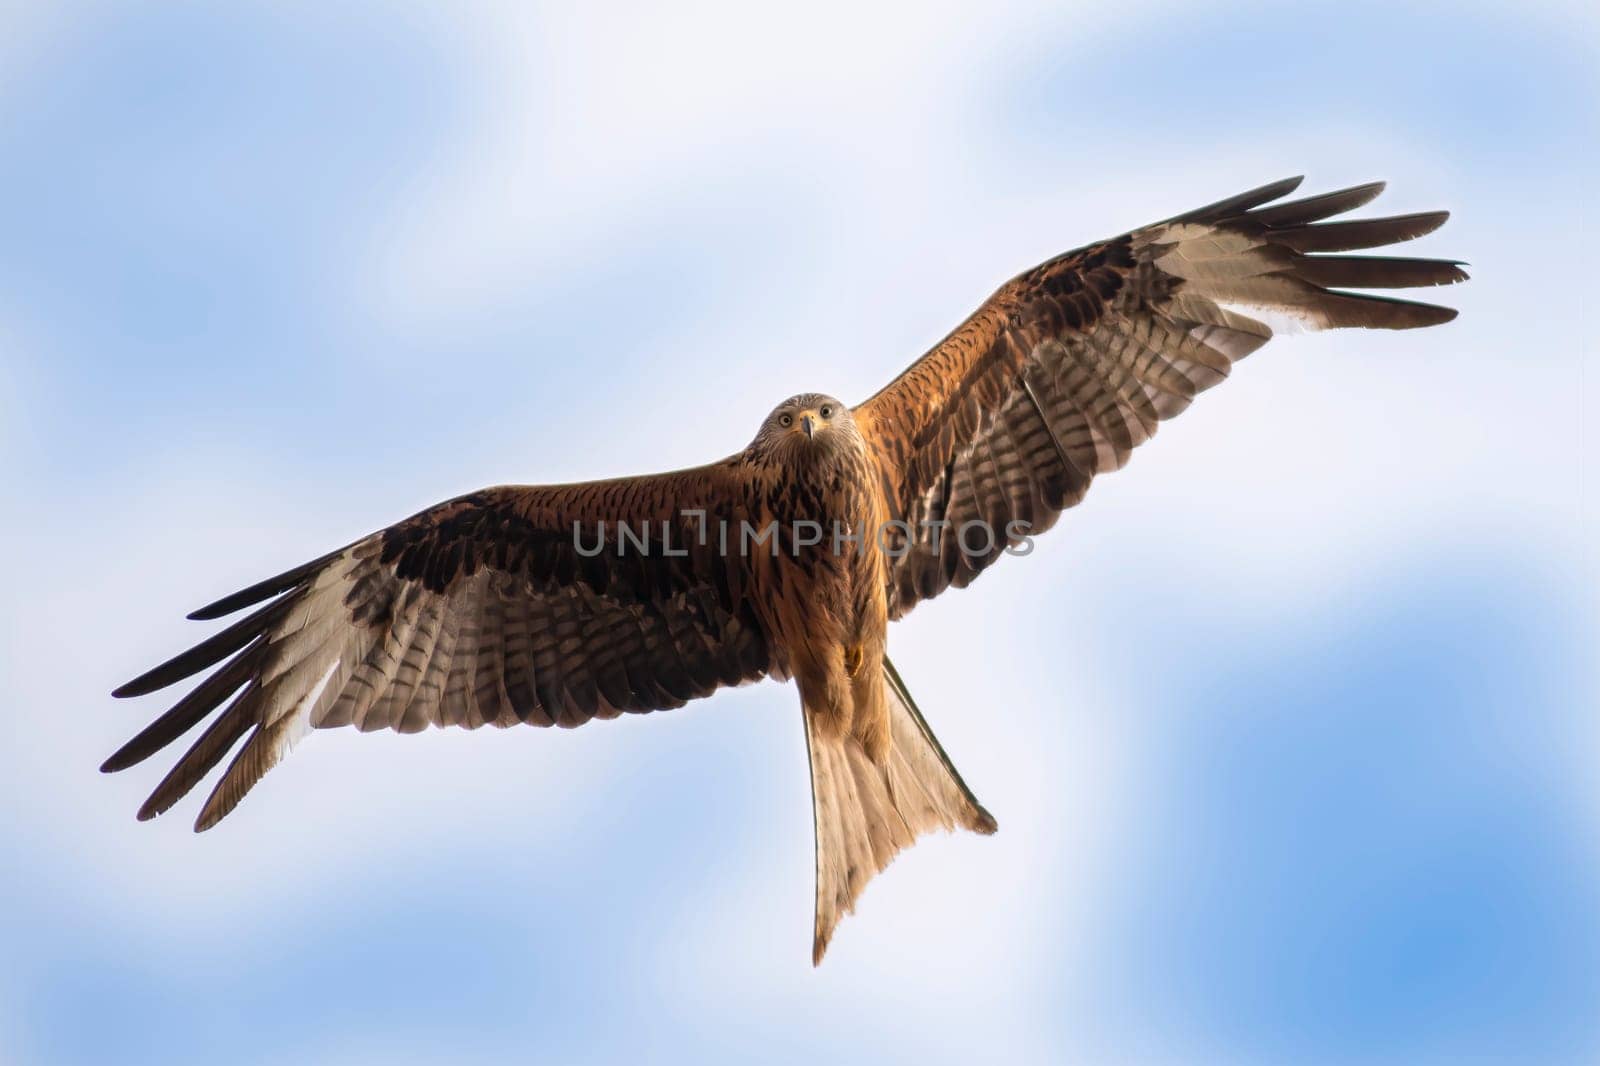 a red kite flies in the blue sky looking for prey